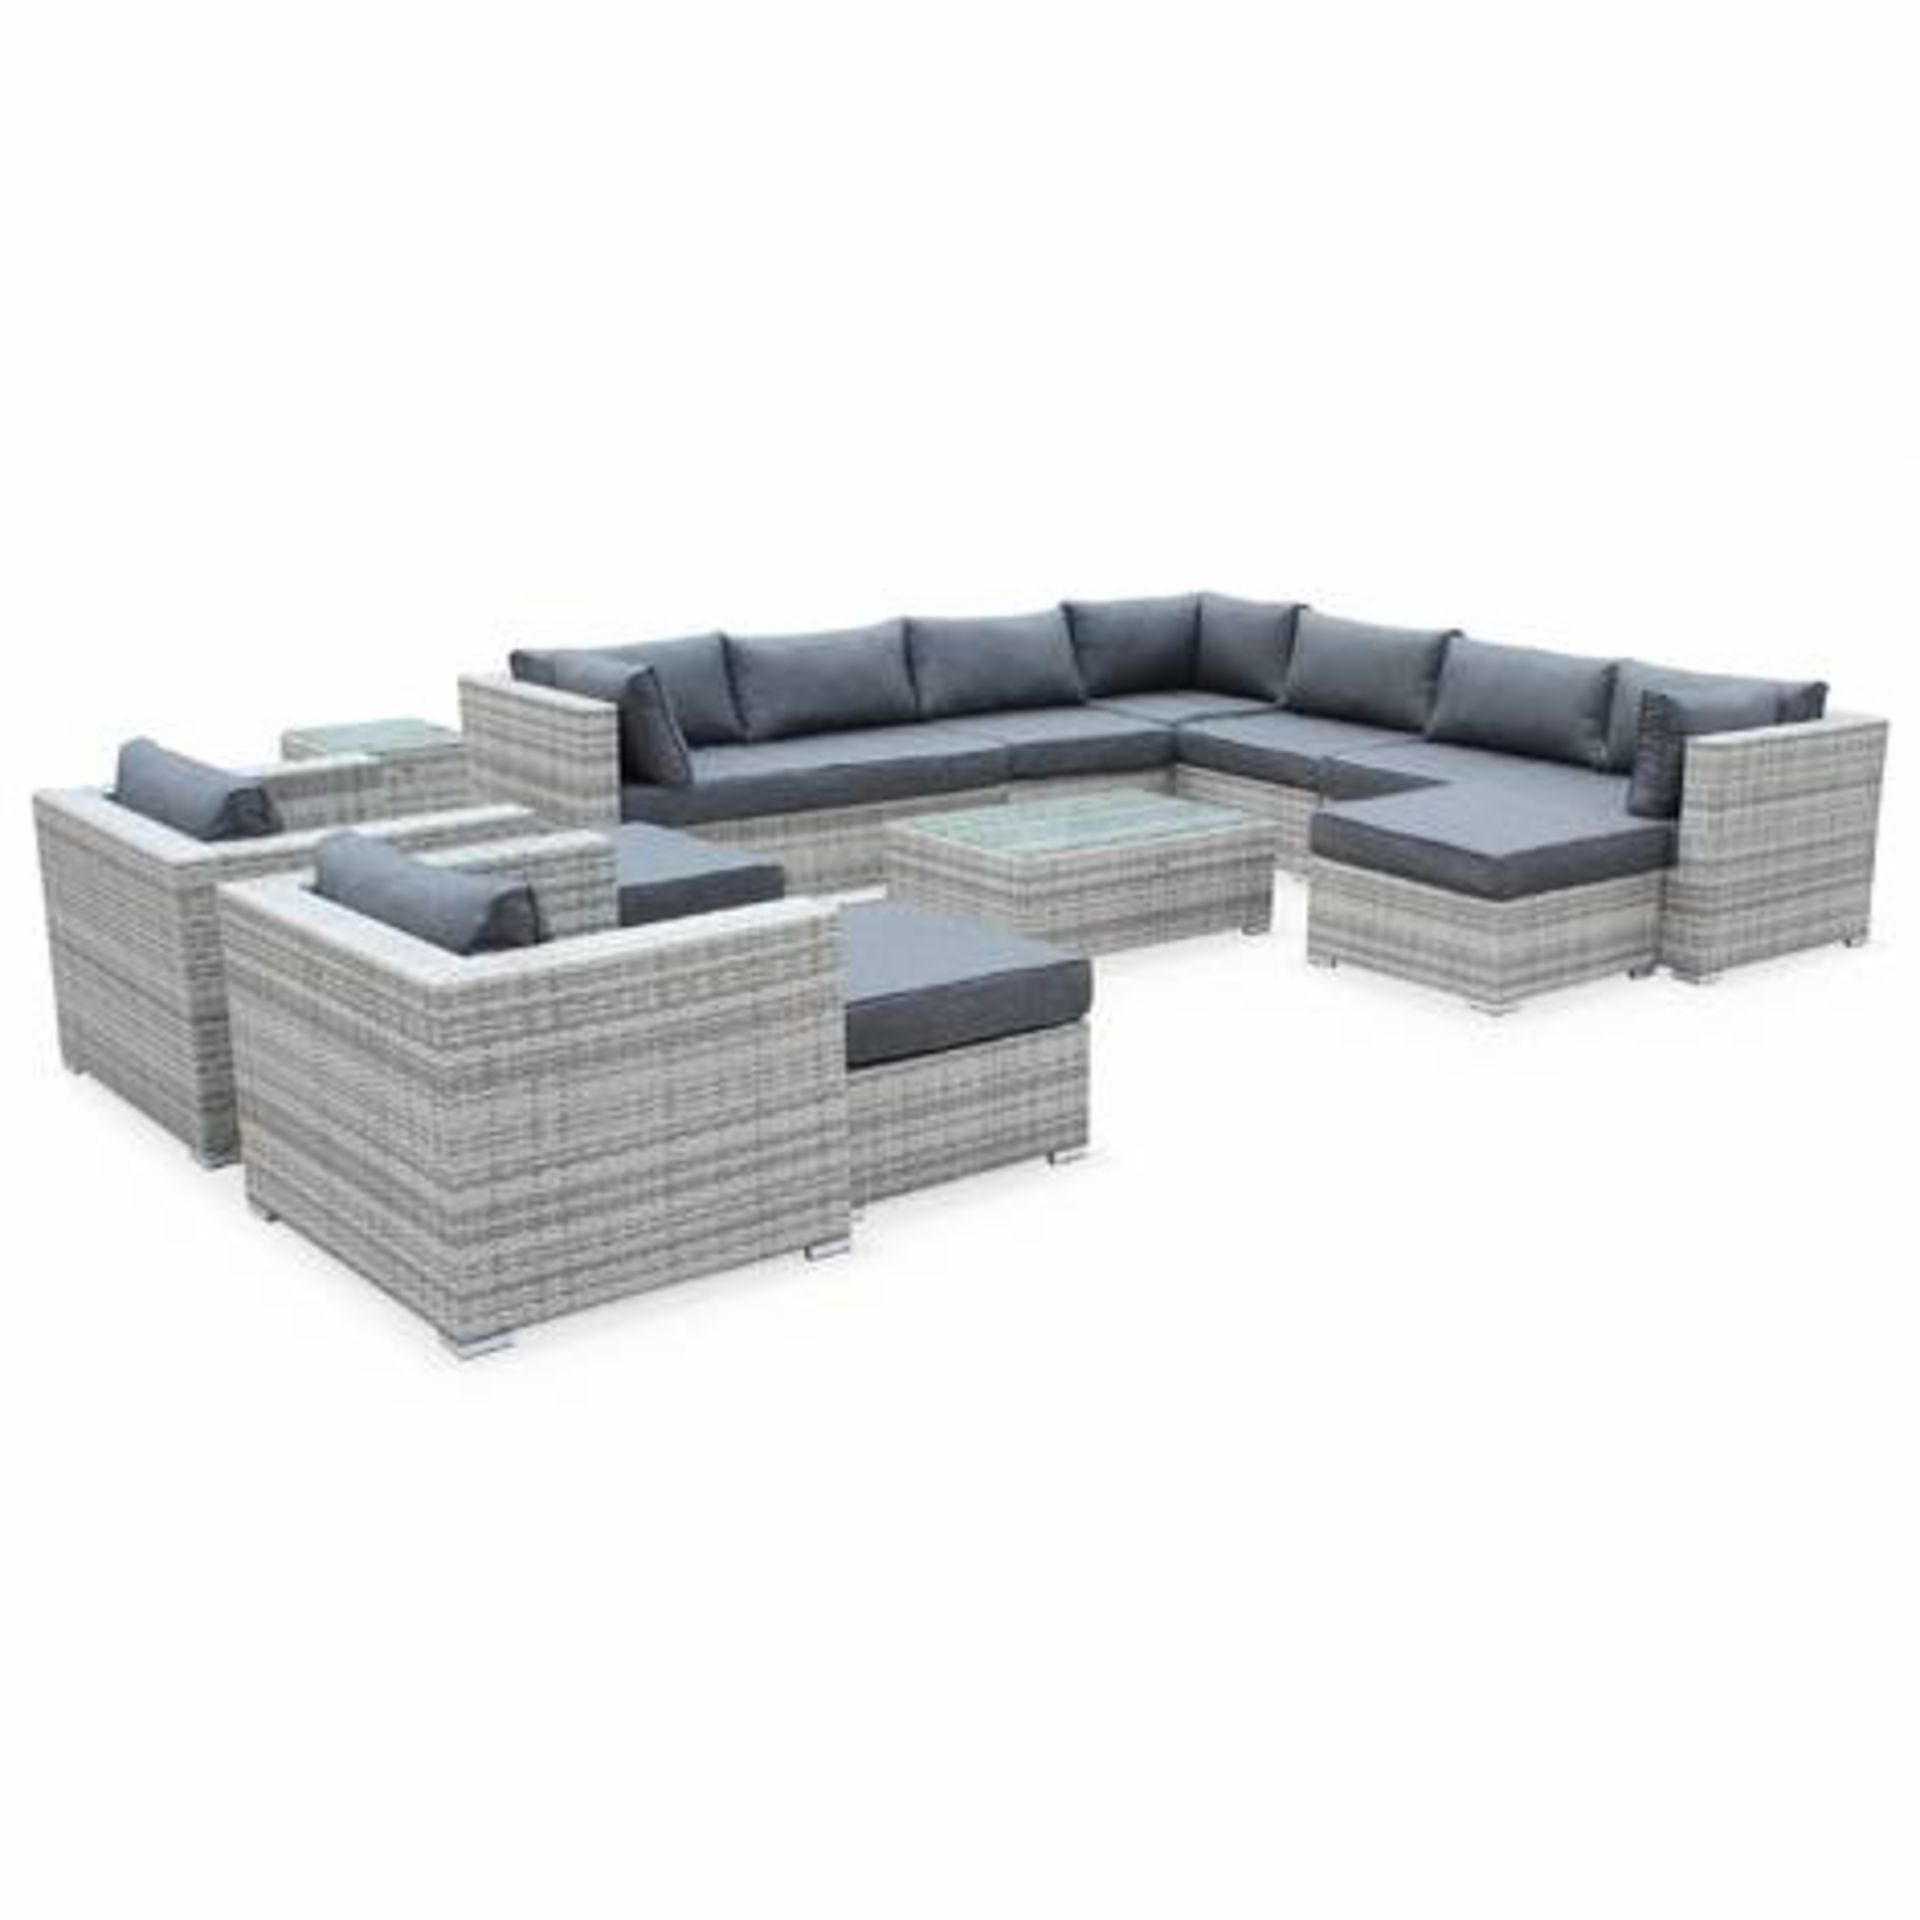 V Brand New 14 Seater Ultimate Rattan Garden Patio Set Inc Huge L Shaped Sofa Section + 2 x Separate